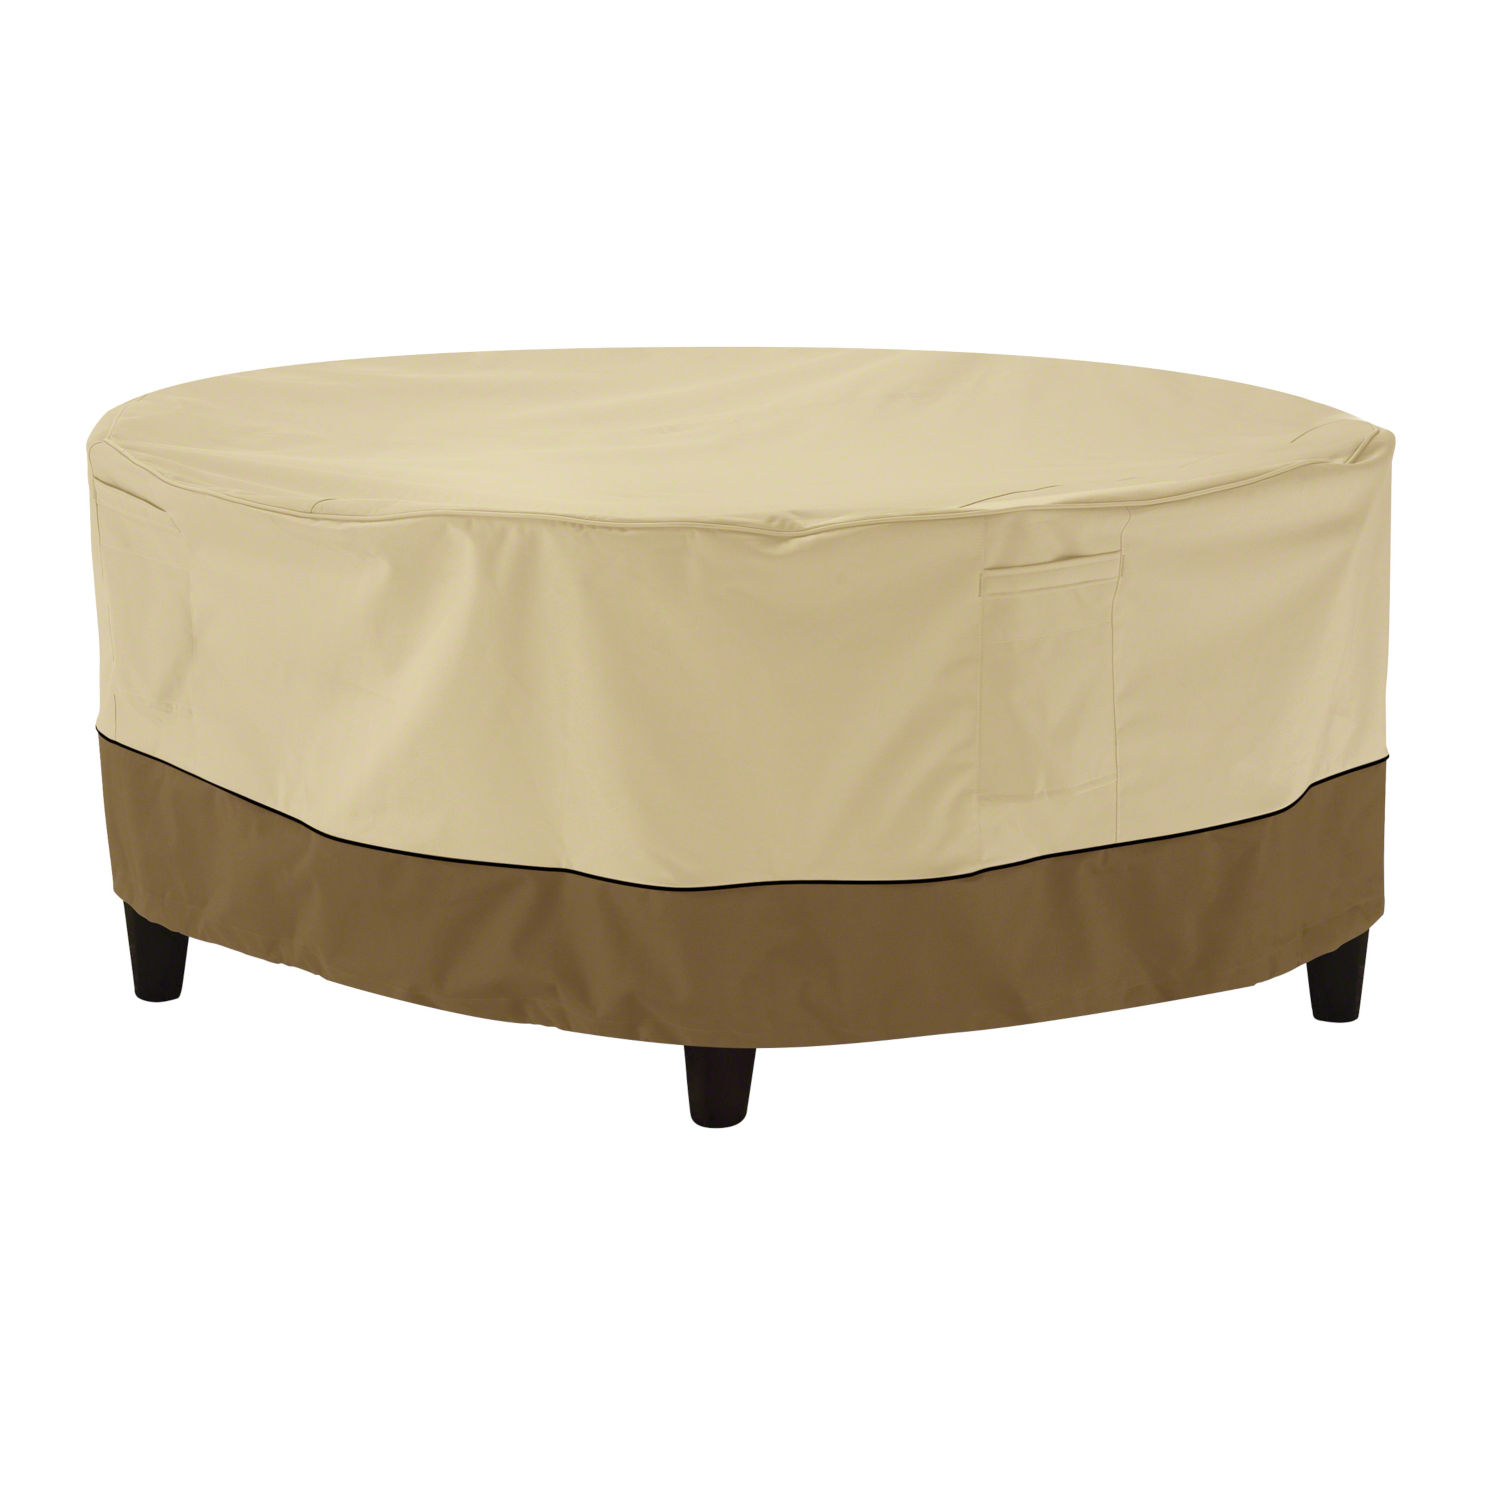 Ash Beige And Brown Round Patio Ottoman And Coffee Table Cover